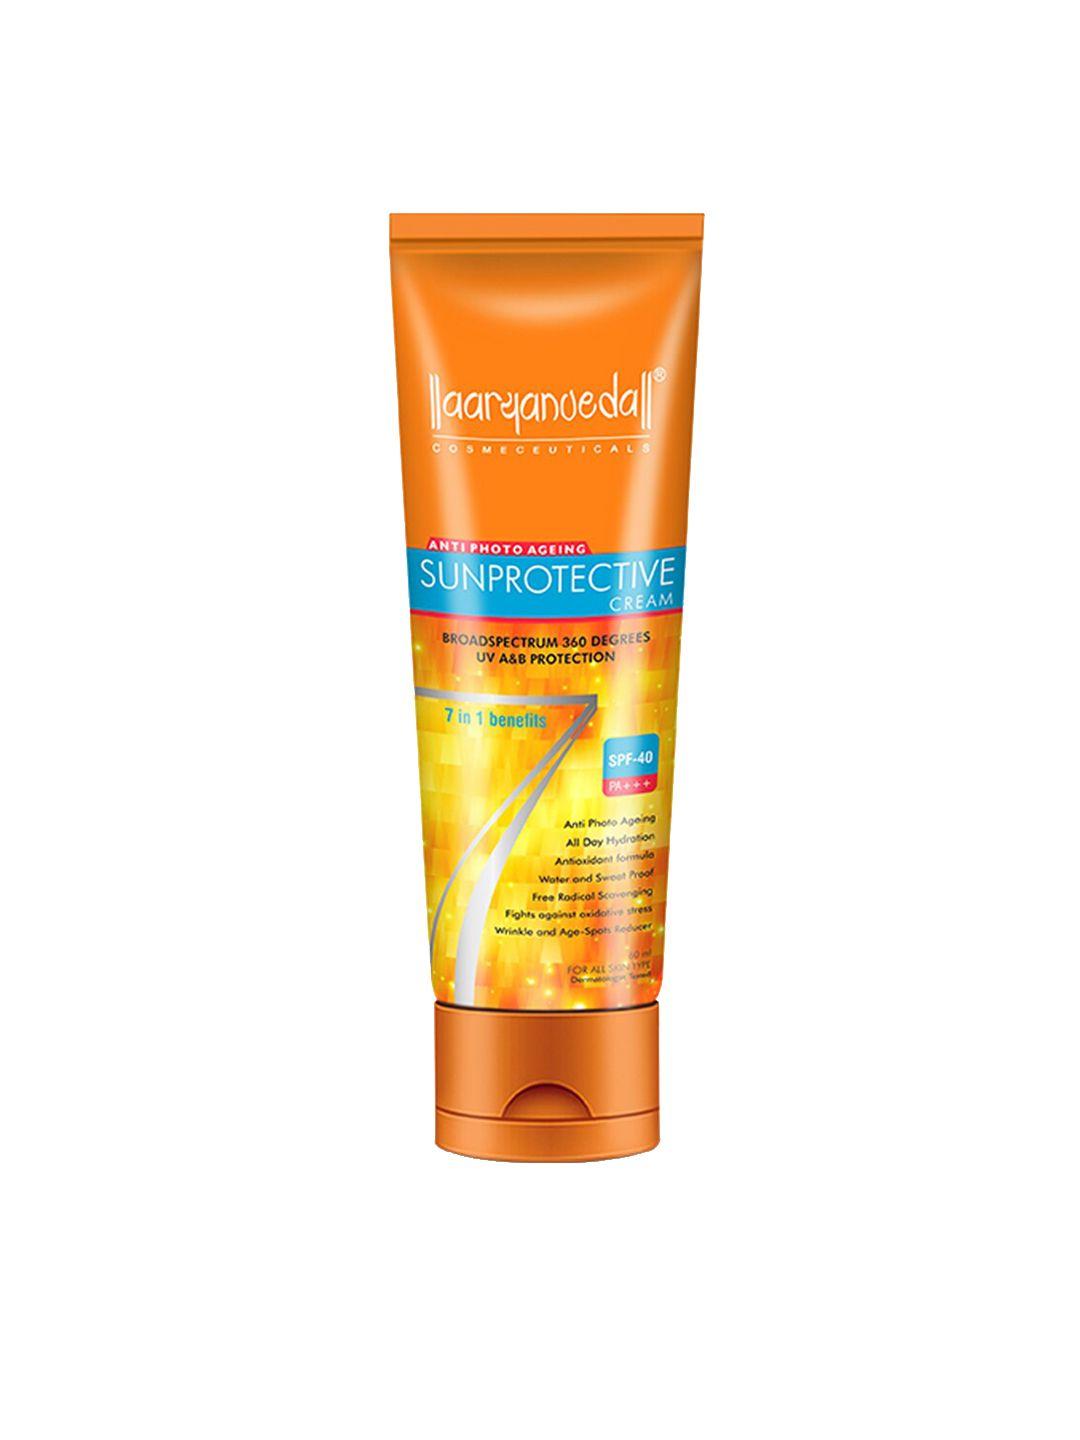 aryanveda sunprotective spf 40 pa+++ uv/a&b protection all day hydration sunscreen - 60 g